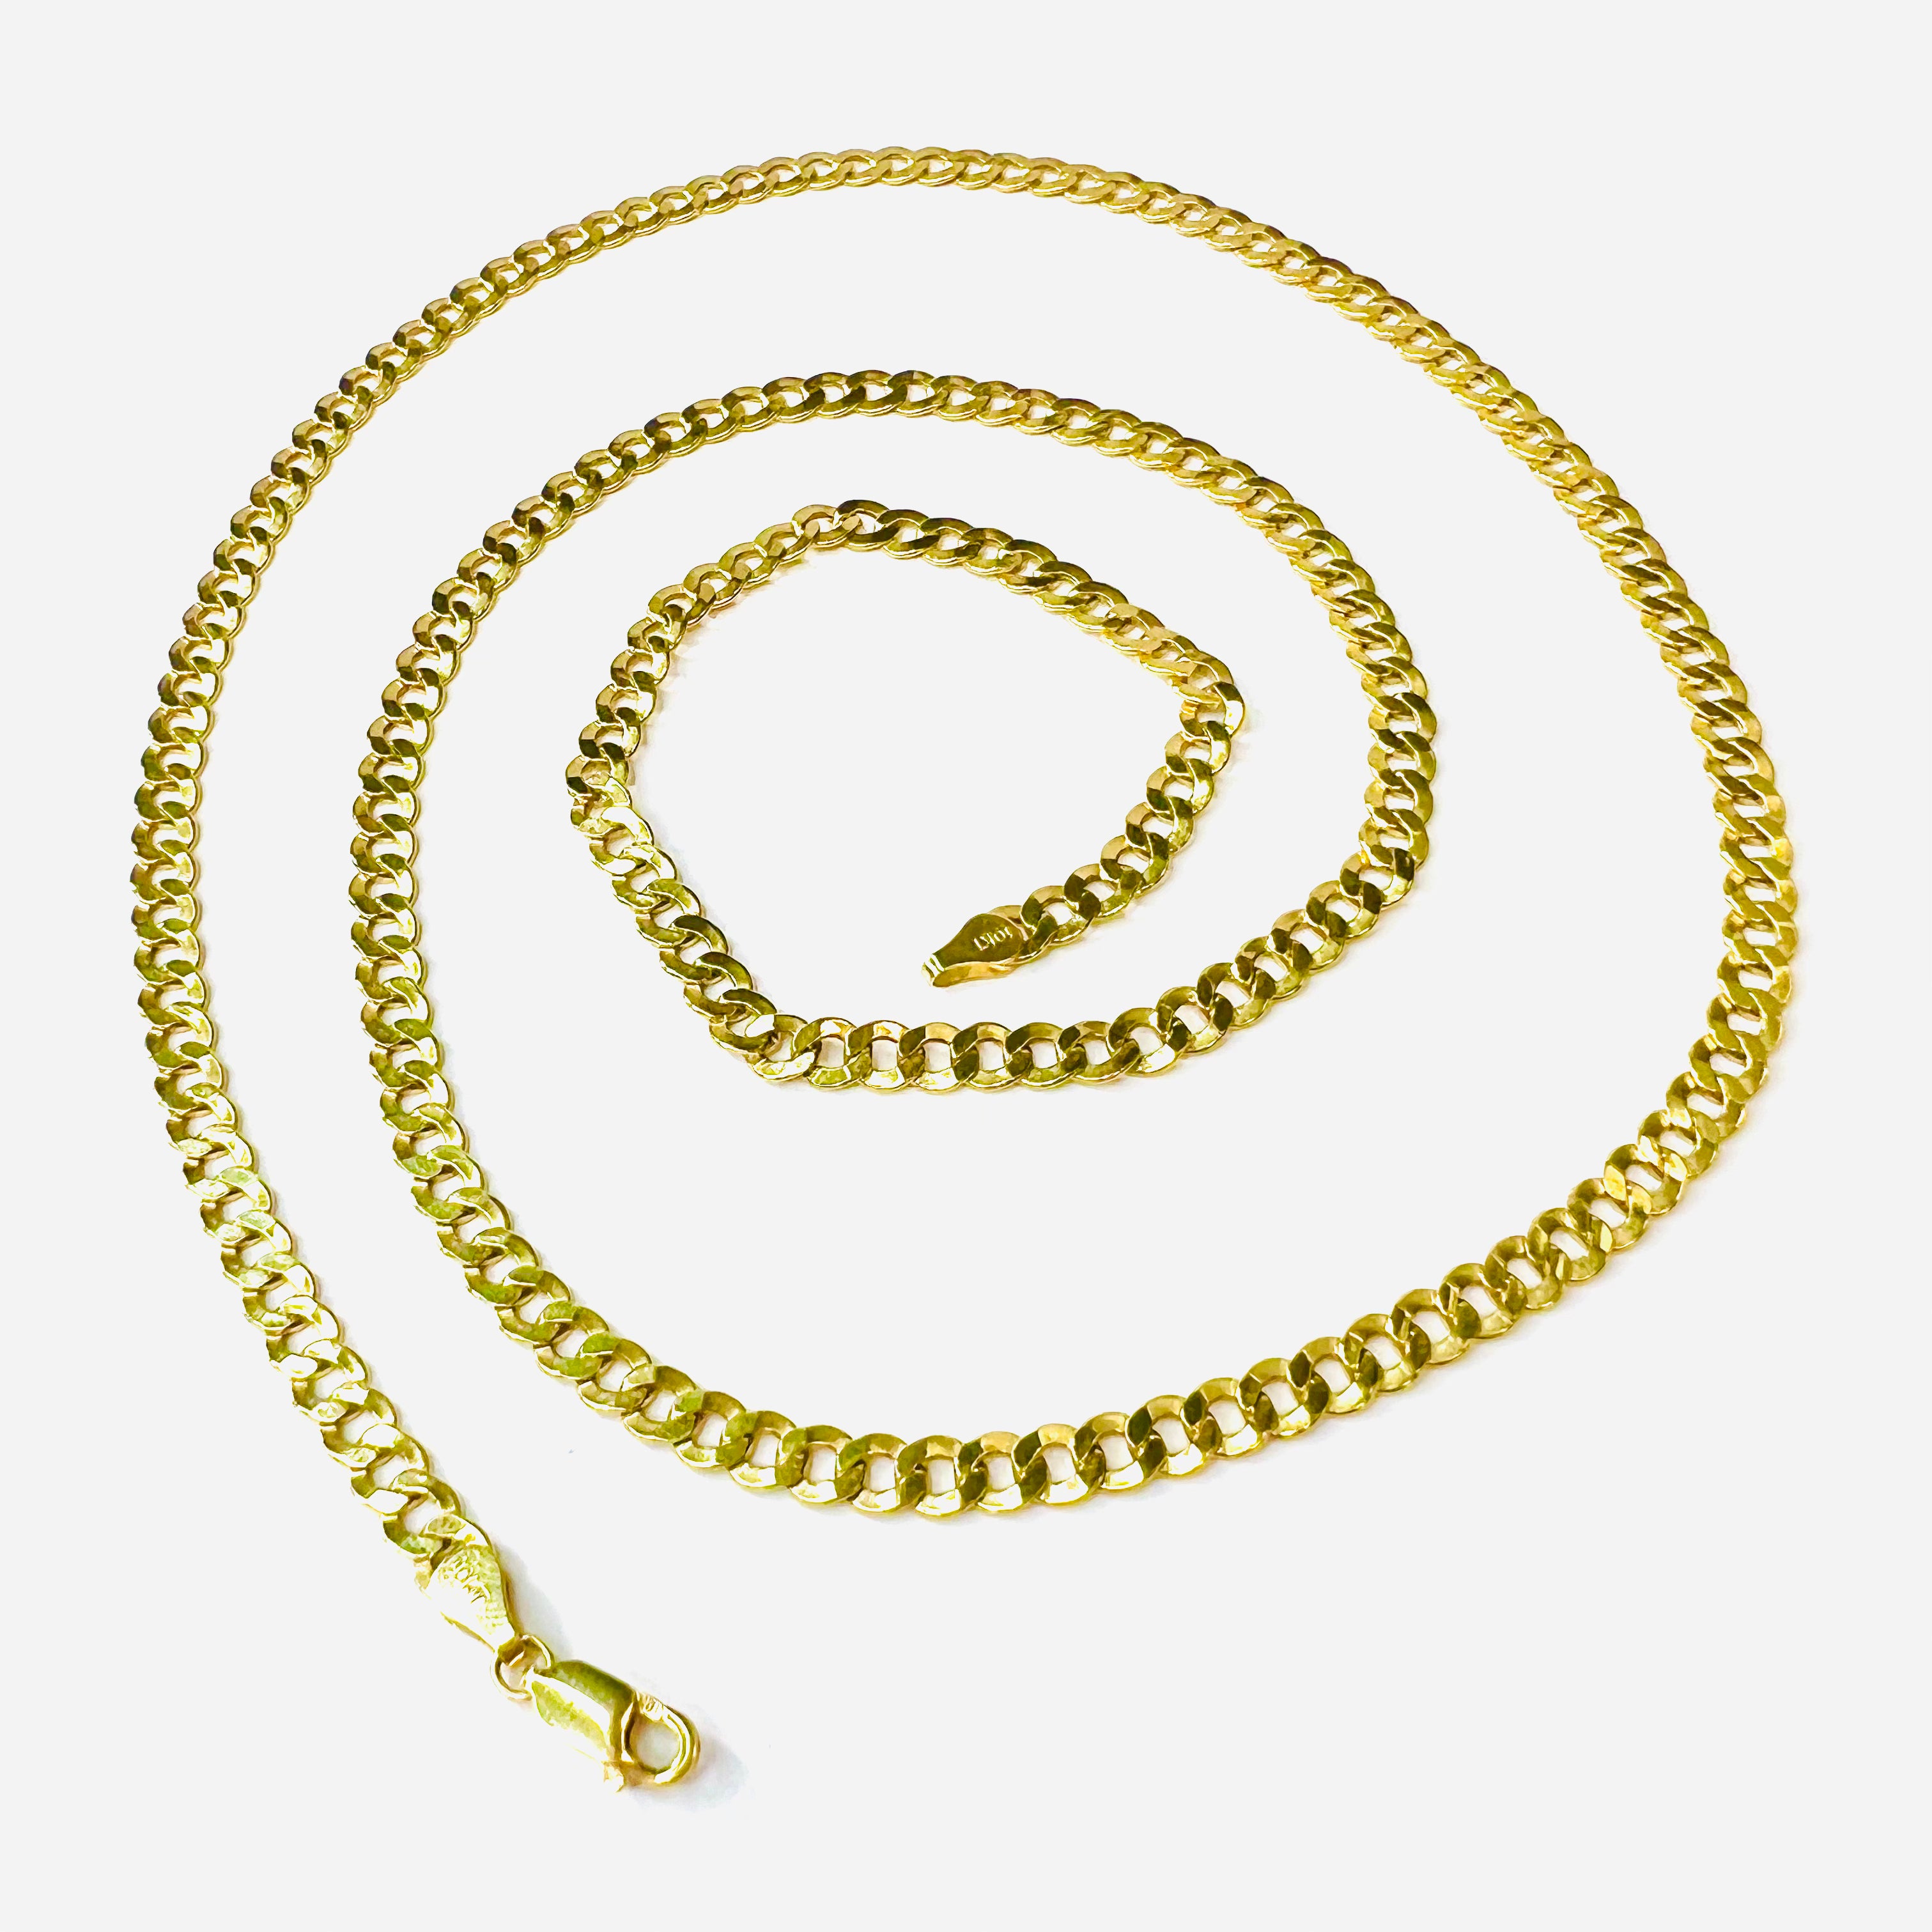 28" 4.5mm 10K Yellow Gold Cuban Link Chain Necklace